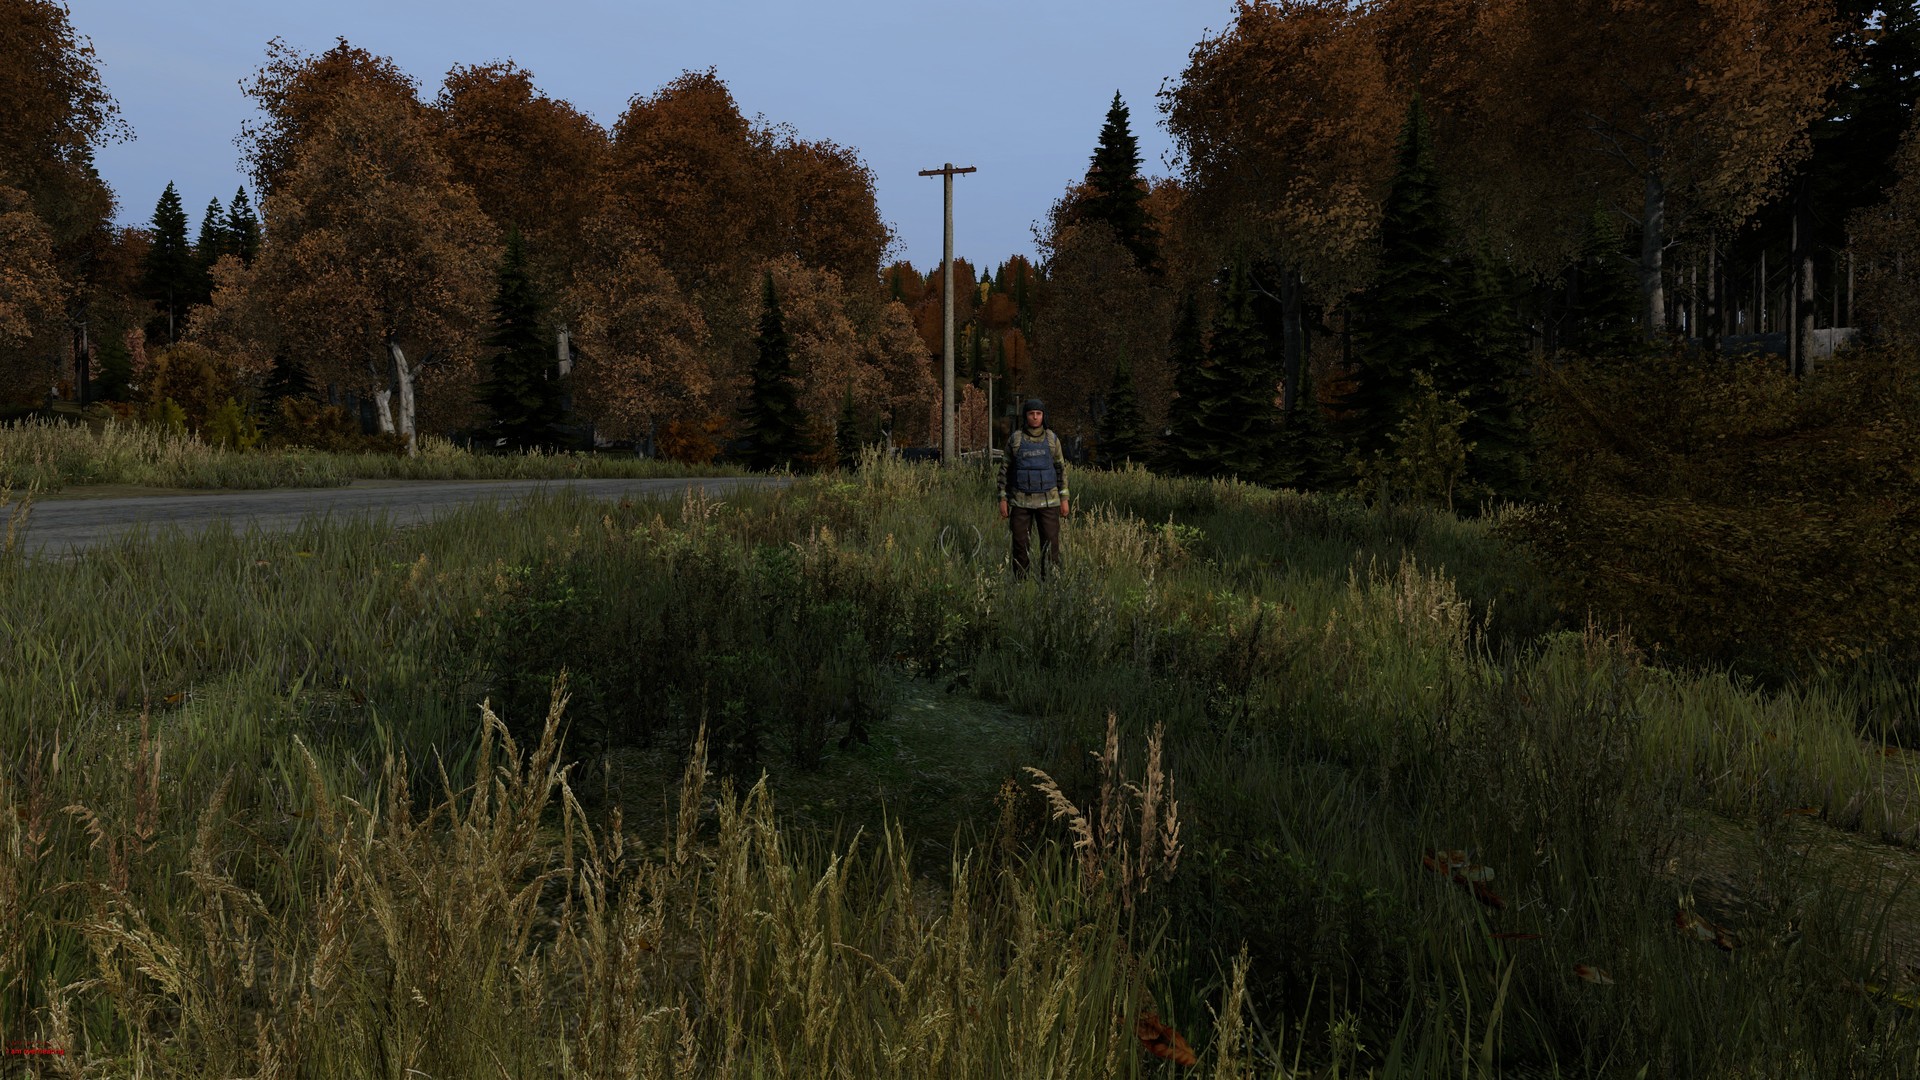 DayZ Images 